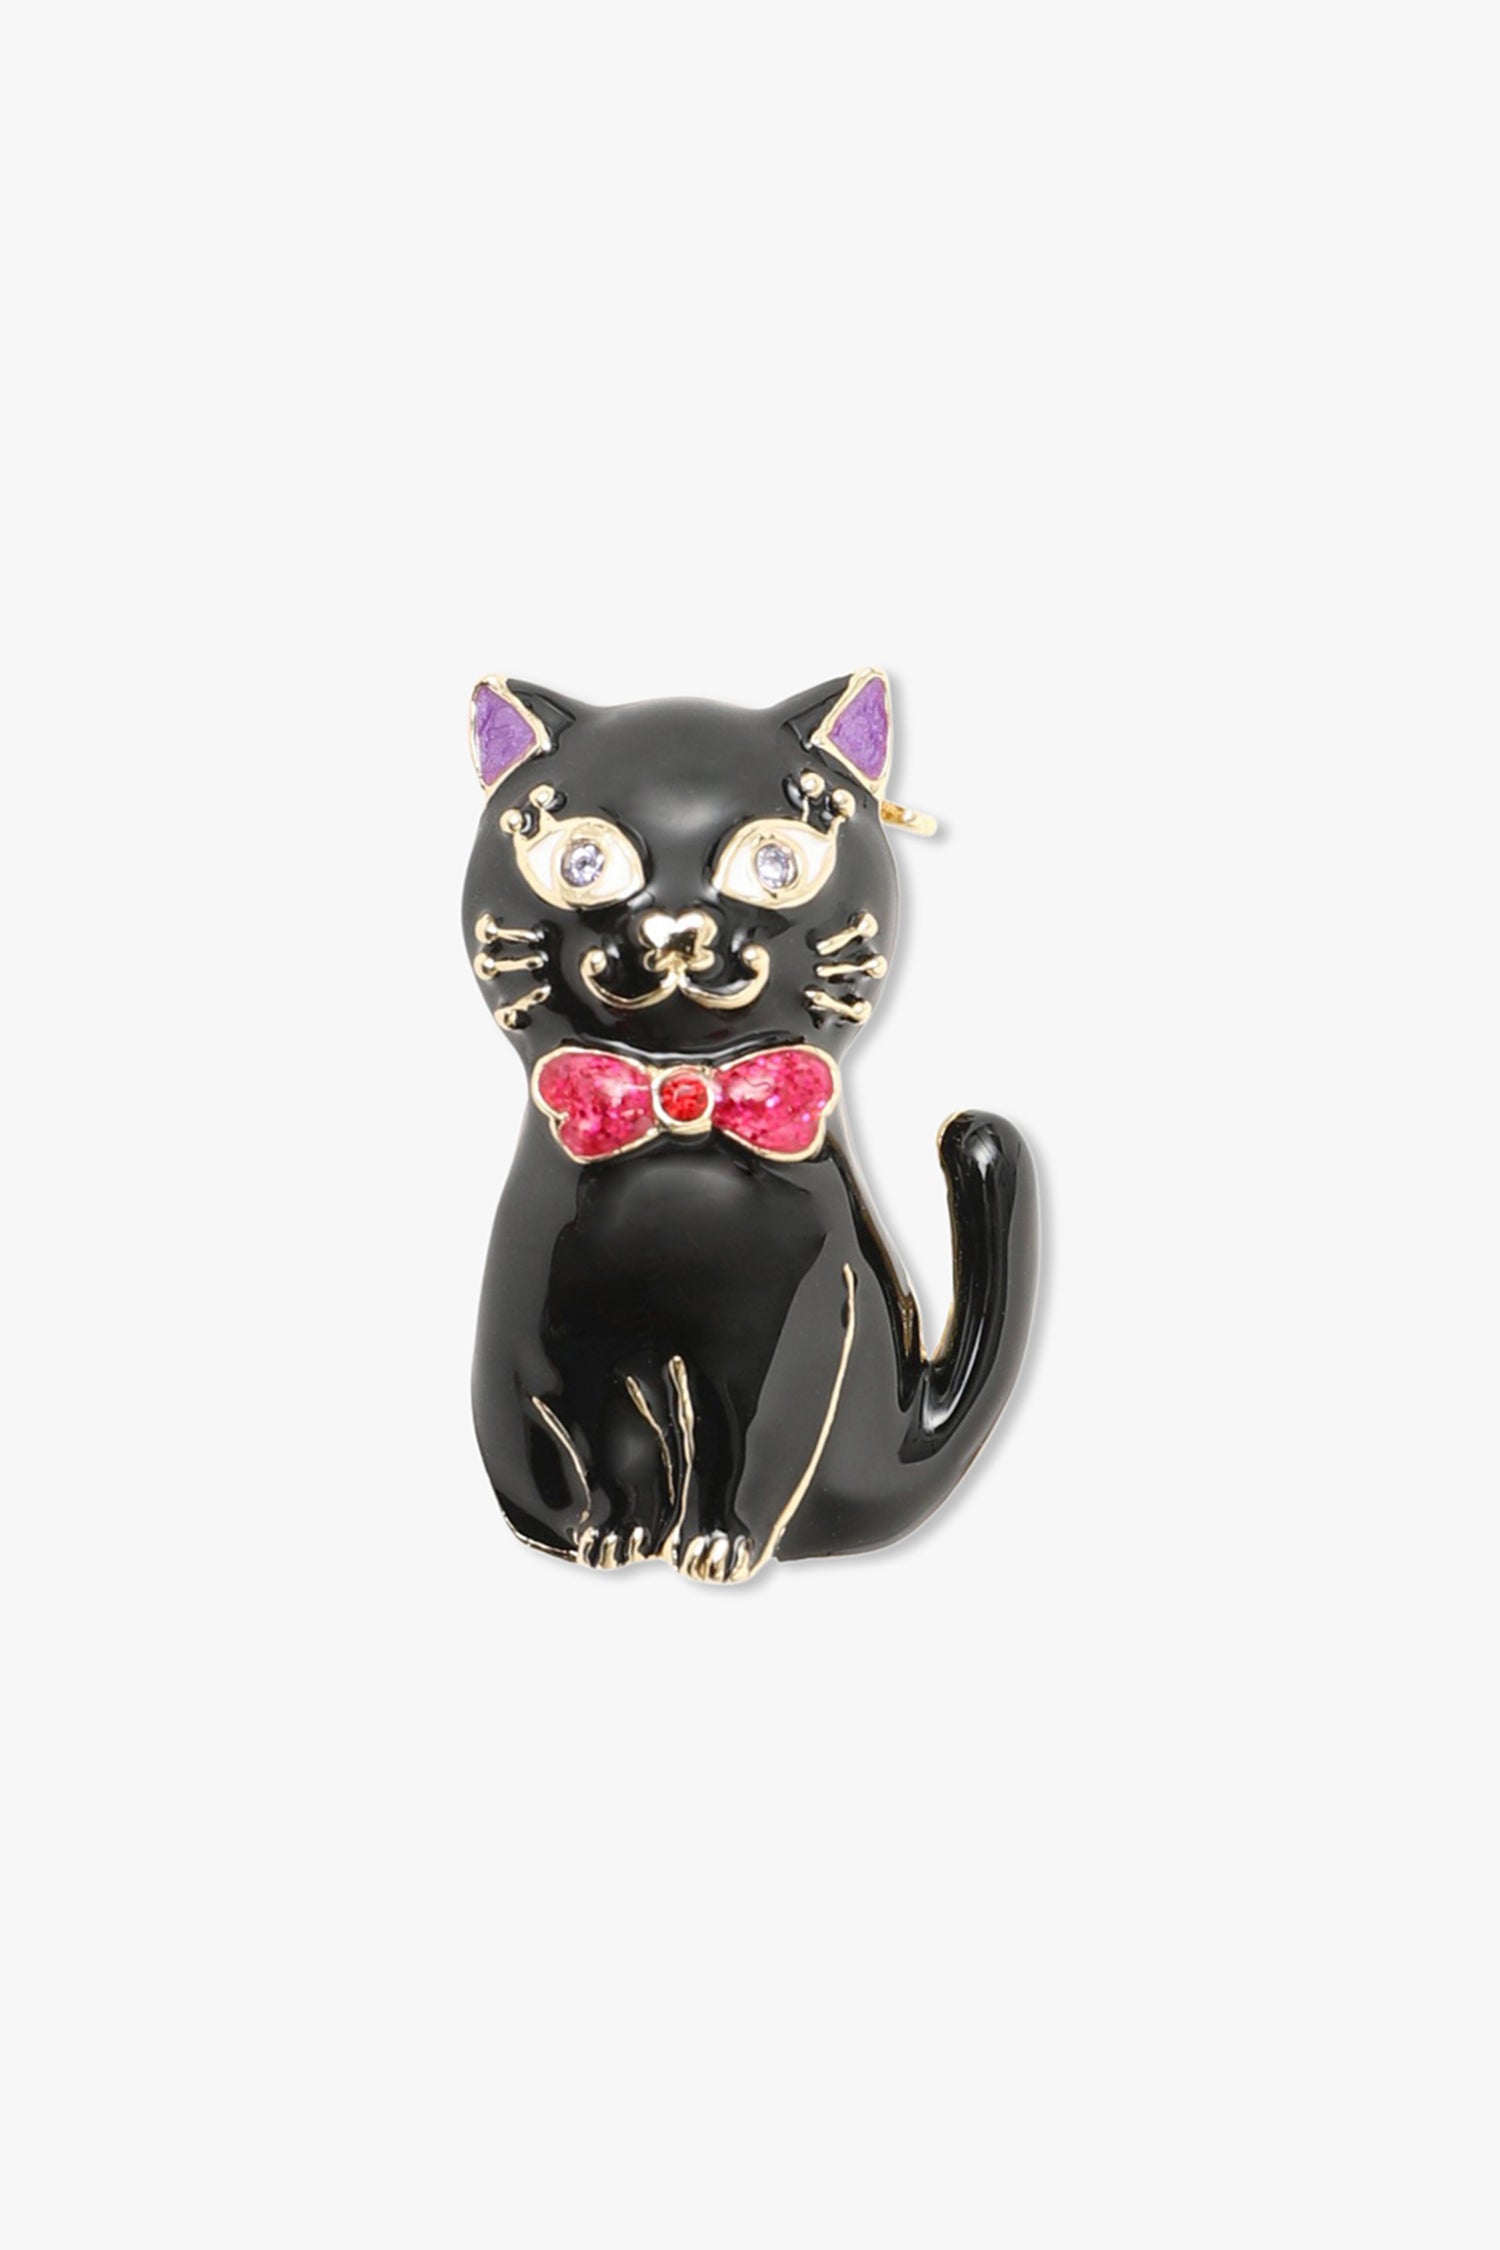 Cat Brooch Black, fat cat with golden edges and a big red knot as a collar, purple ears